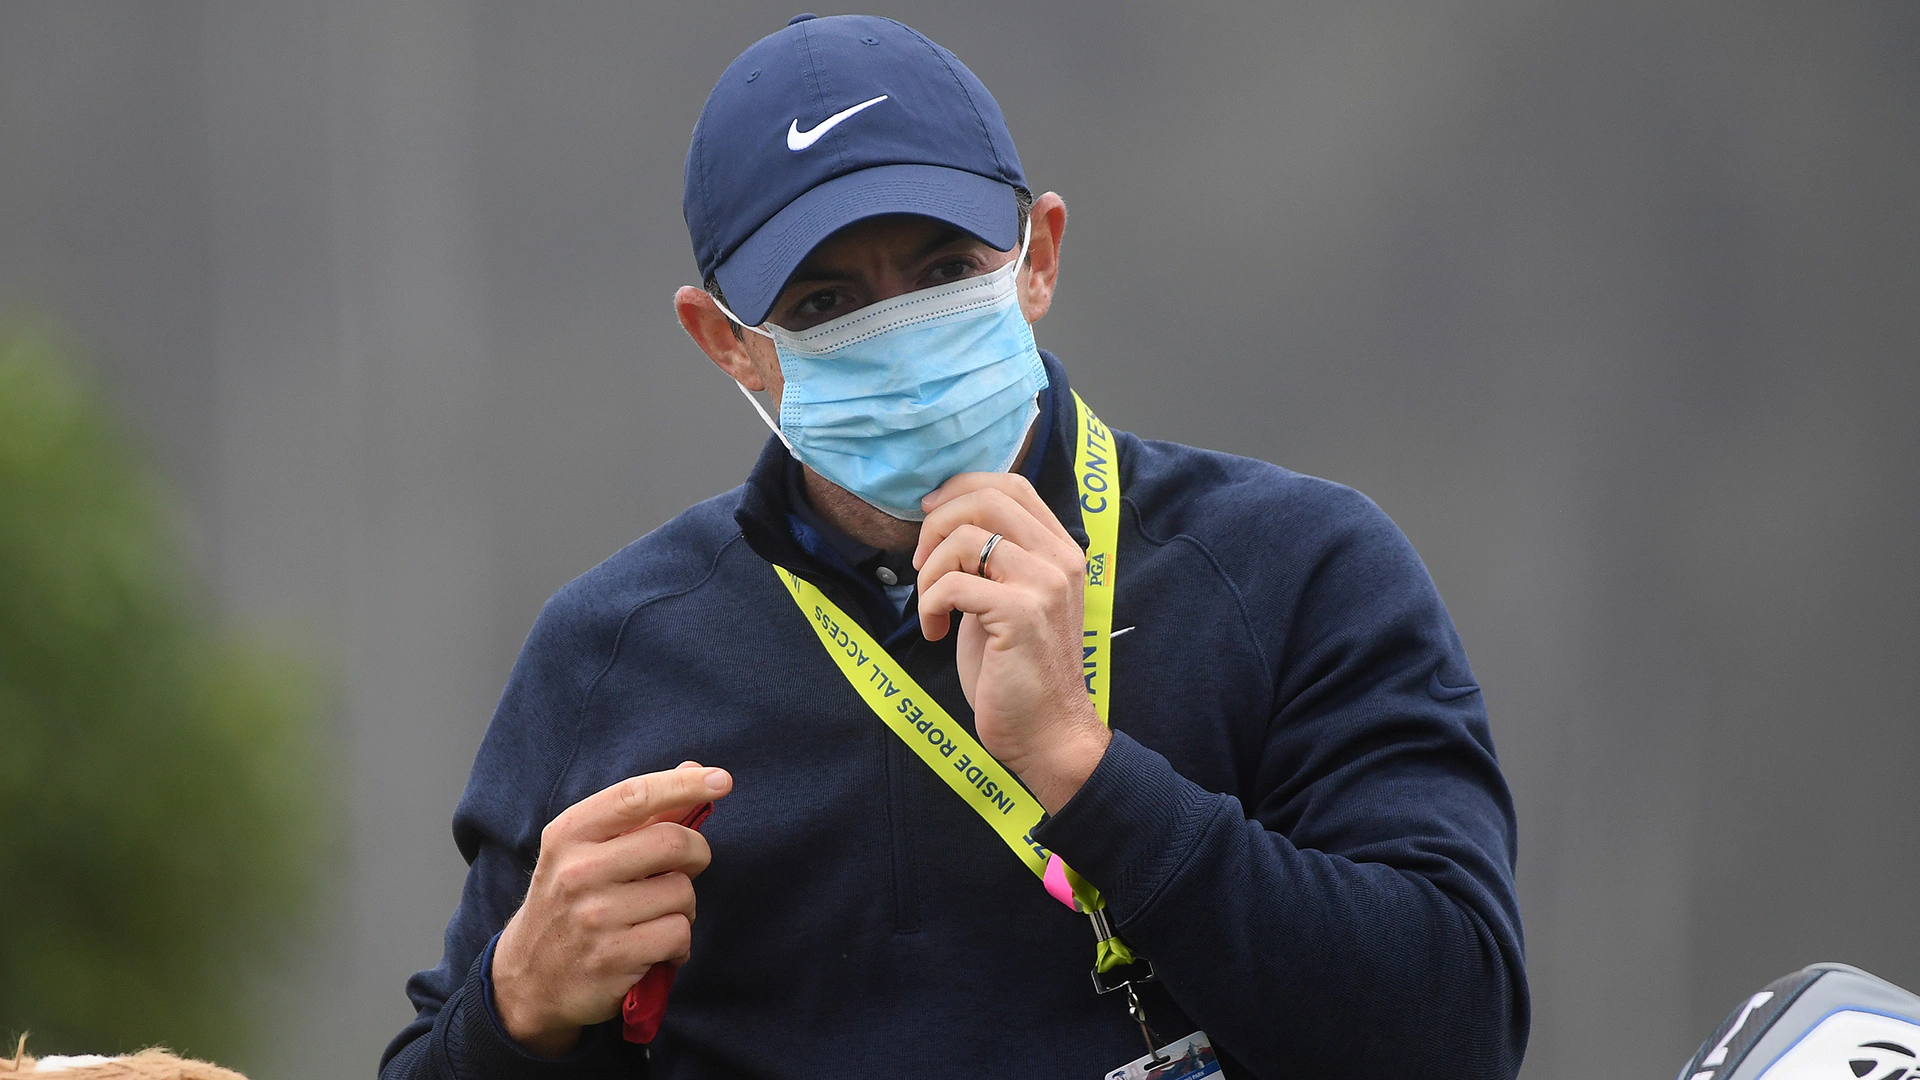 Strange times for Rory McIlroy, but he has signed some autographs